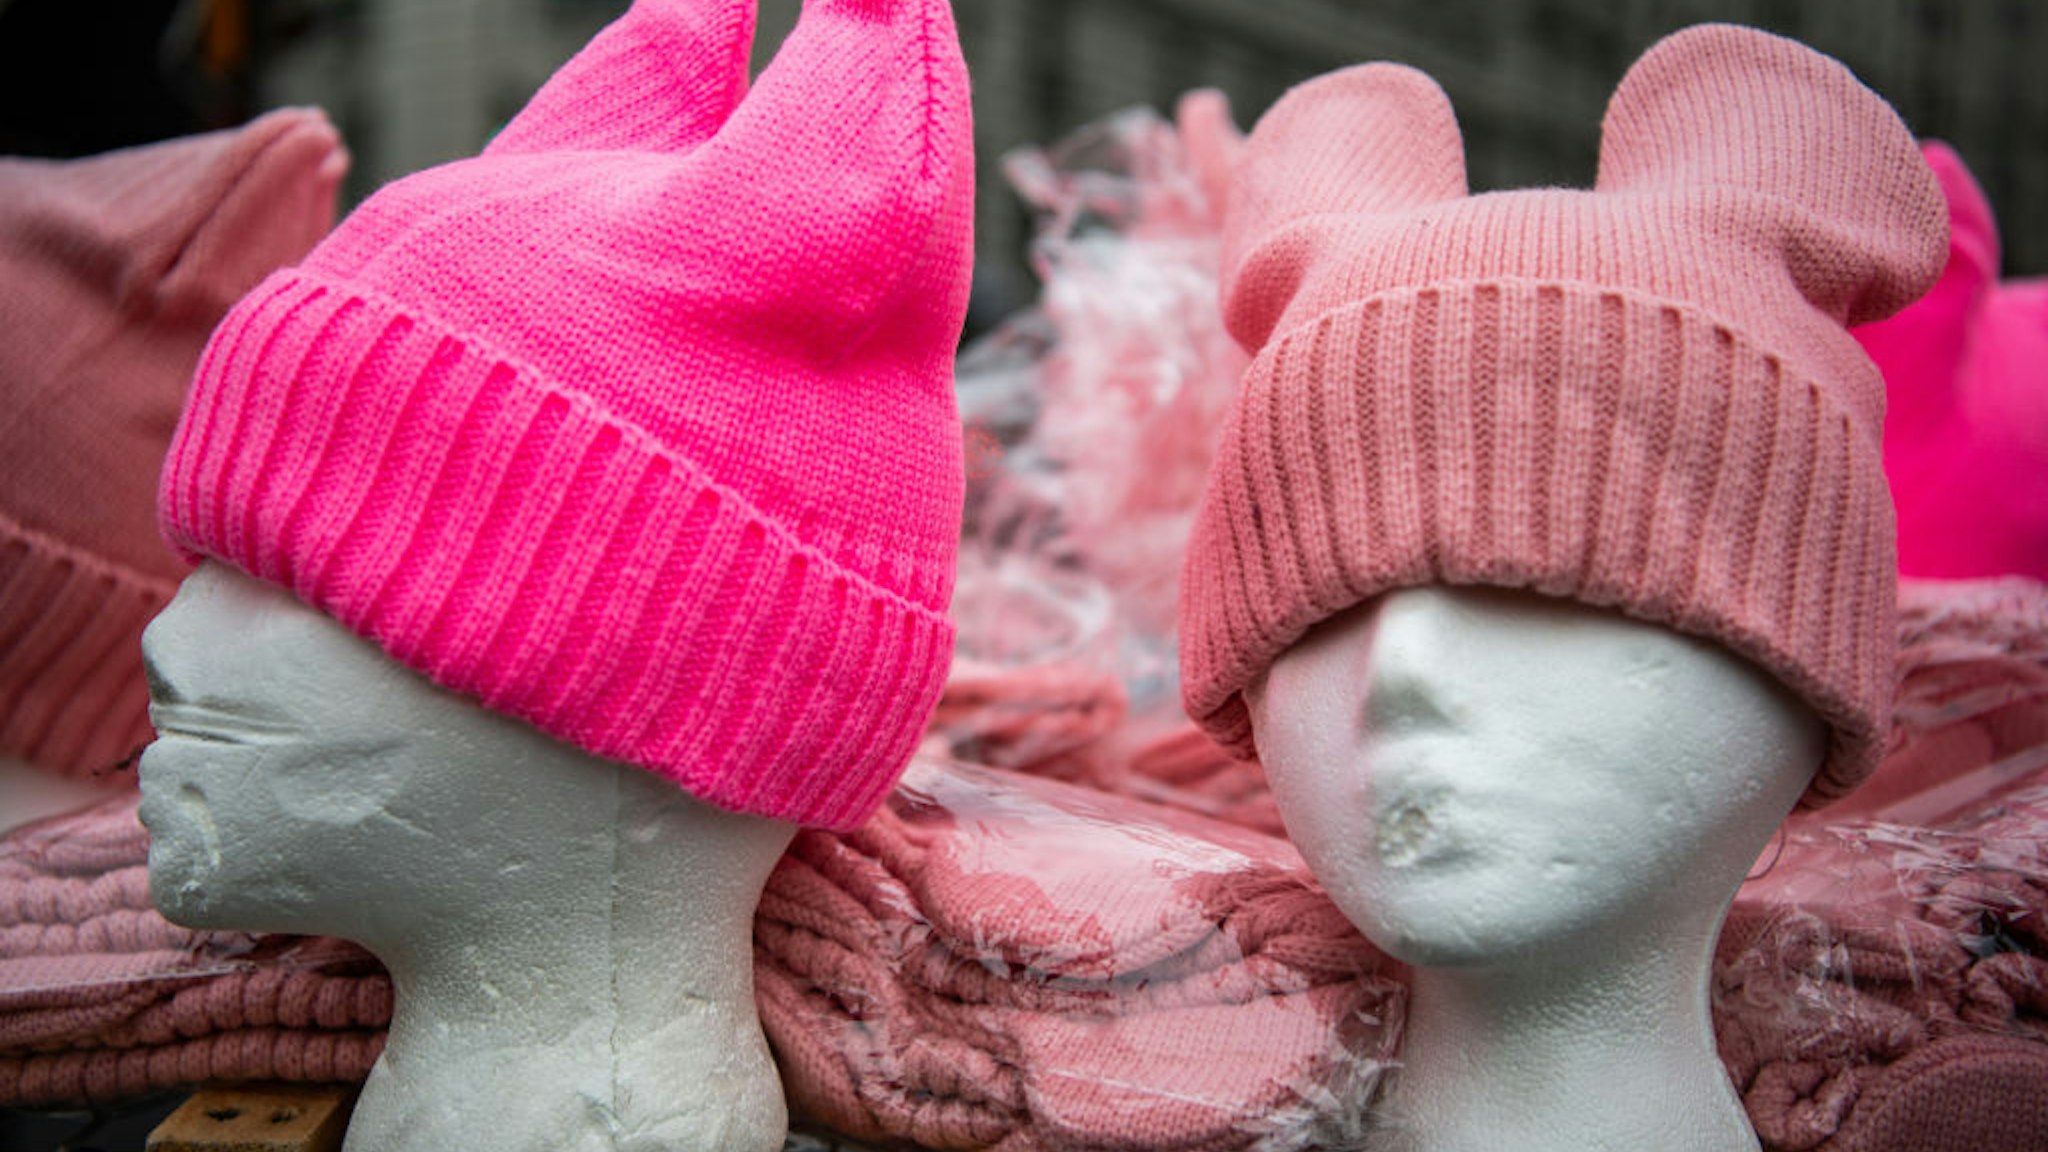 Pink hats are seen on sale at Freedom Plaza during the fourth annual Womens March on Saturday, January 18, 2020 in Washington, D.C.